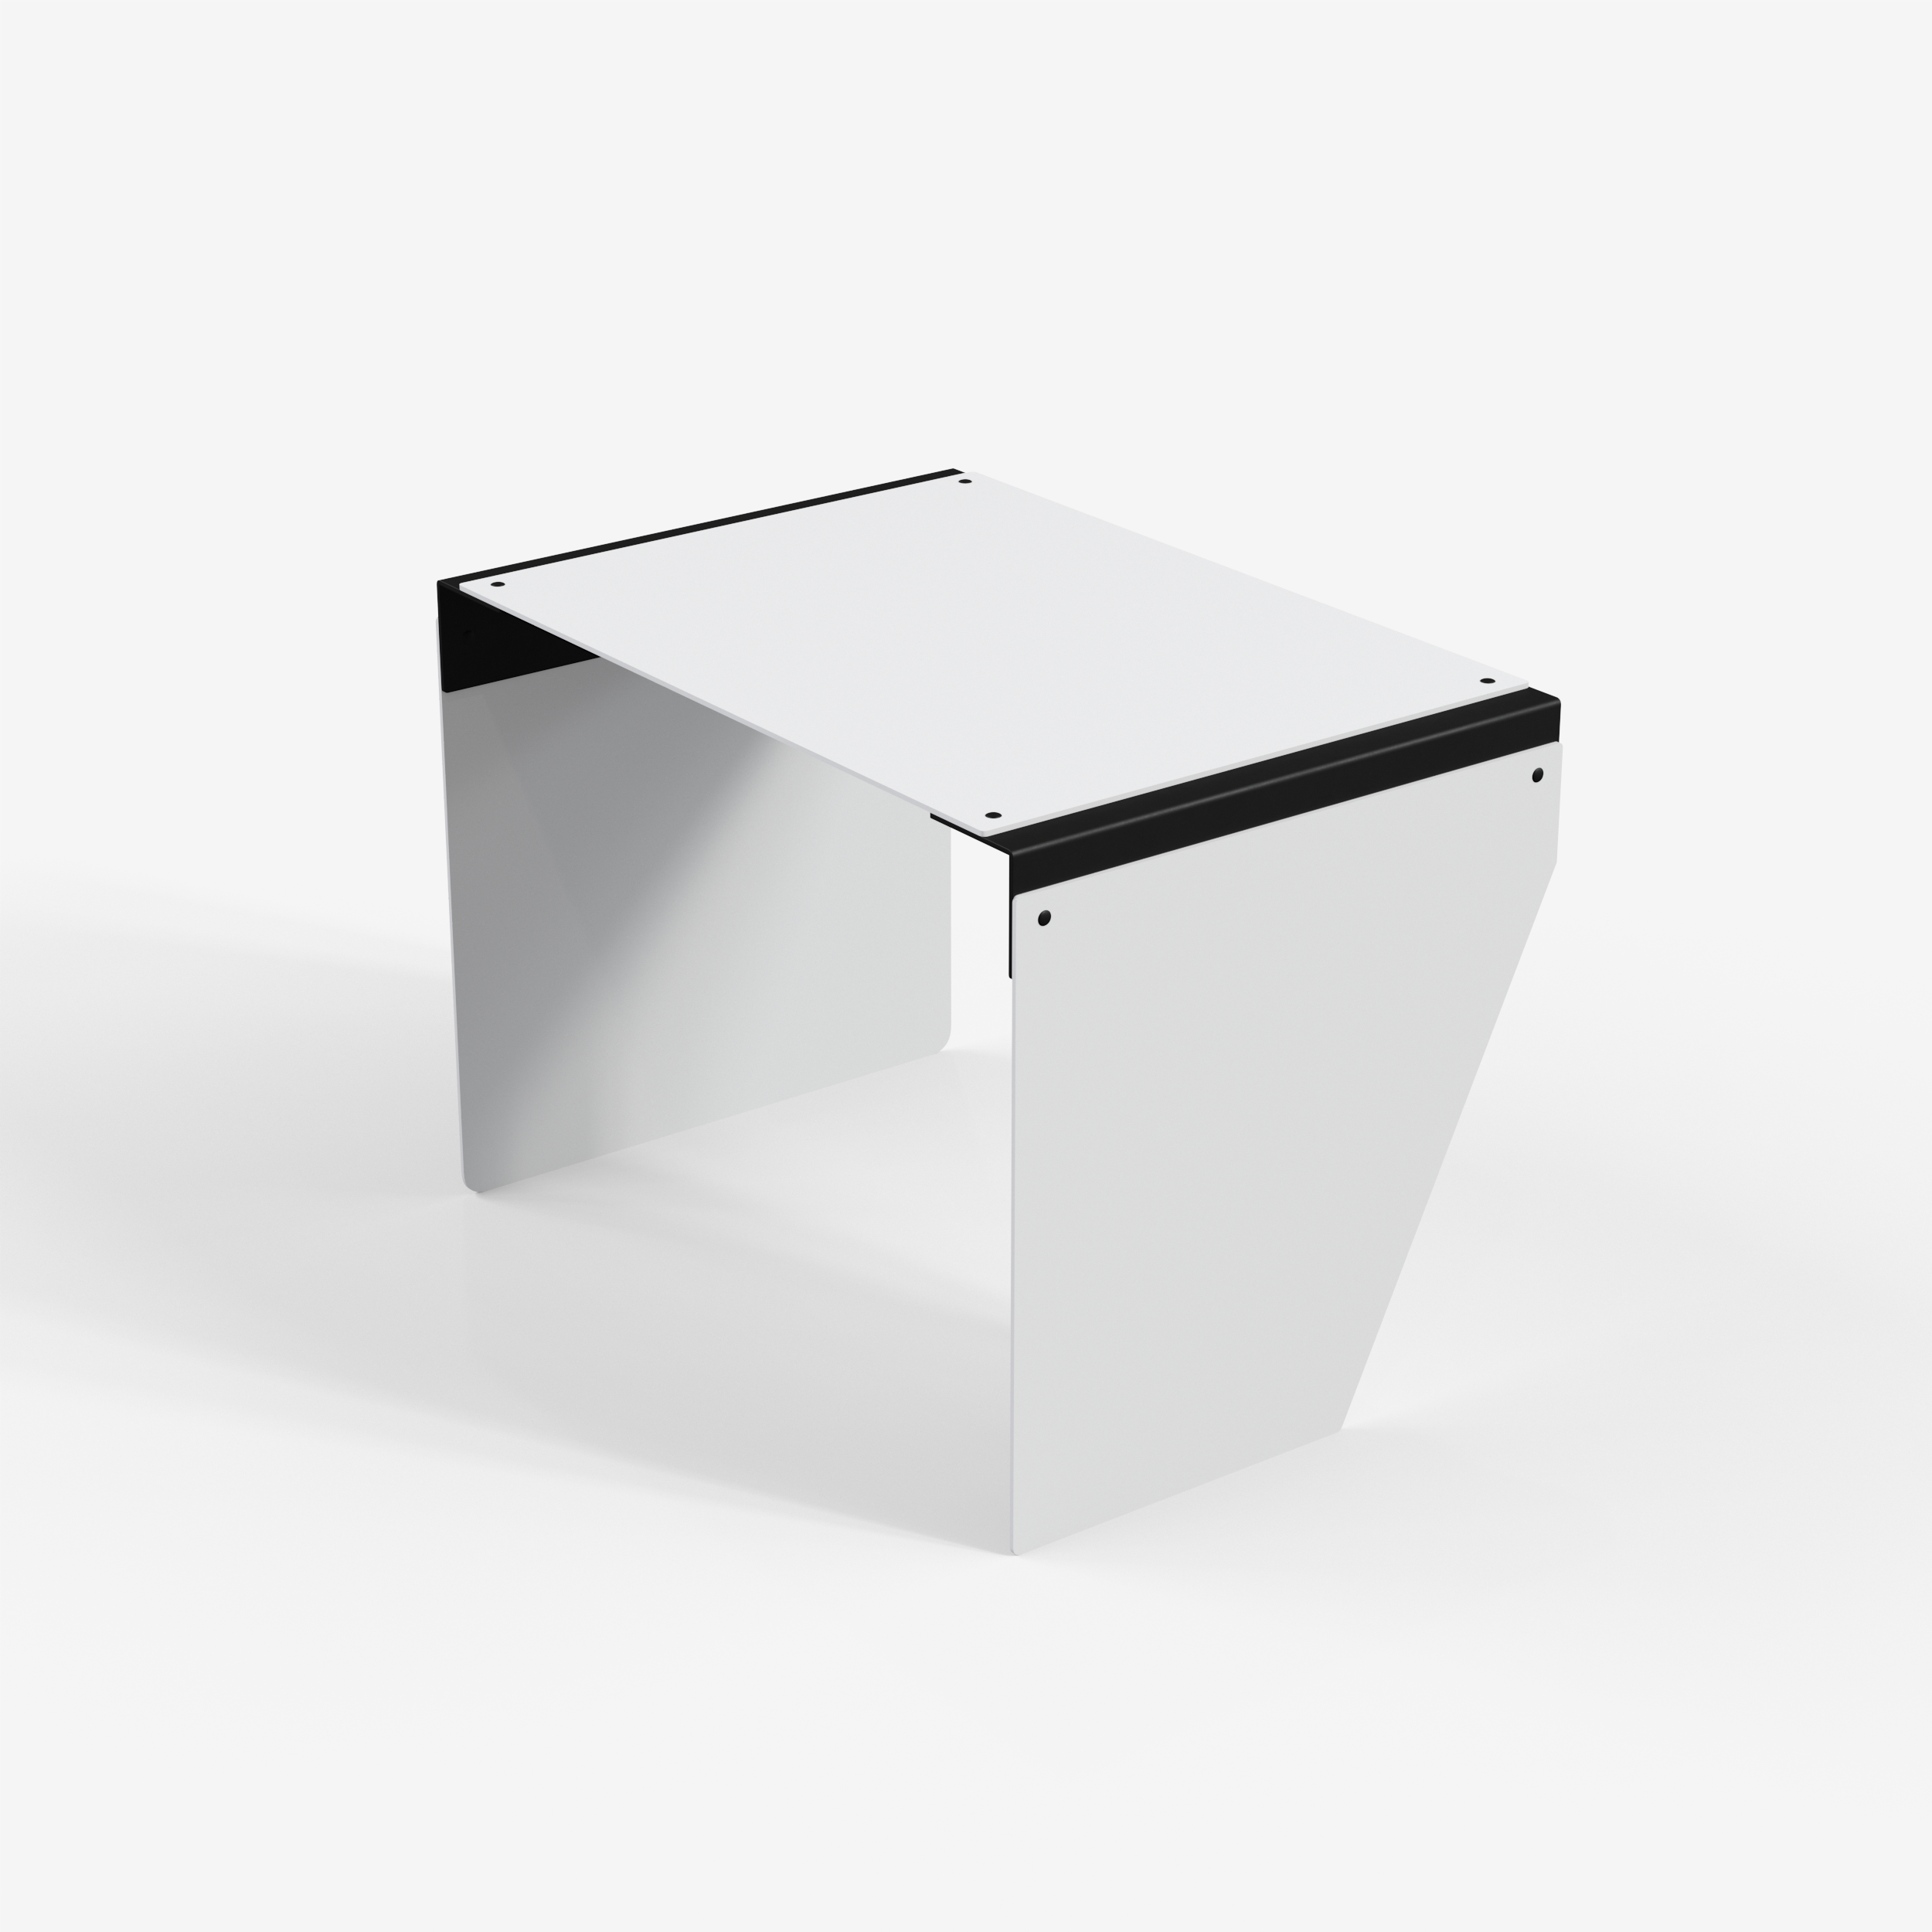 Connect - Coffee Table / L (Angle, White)